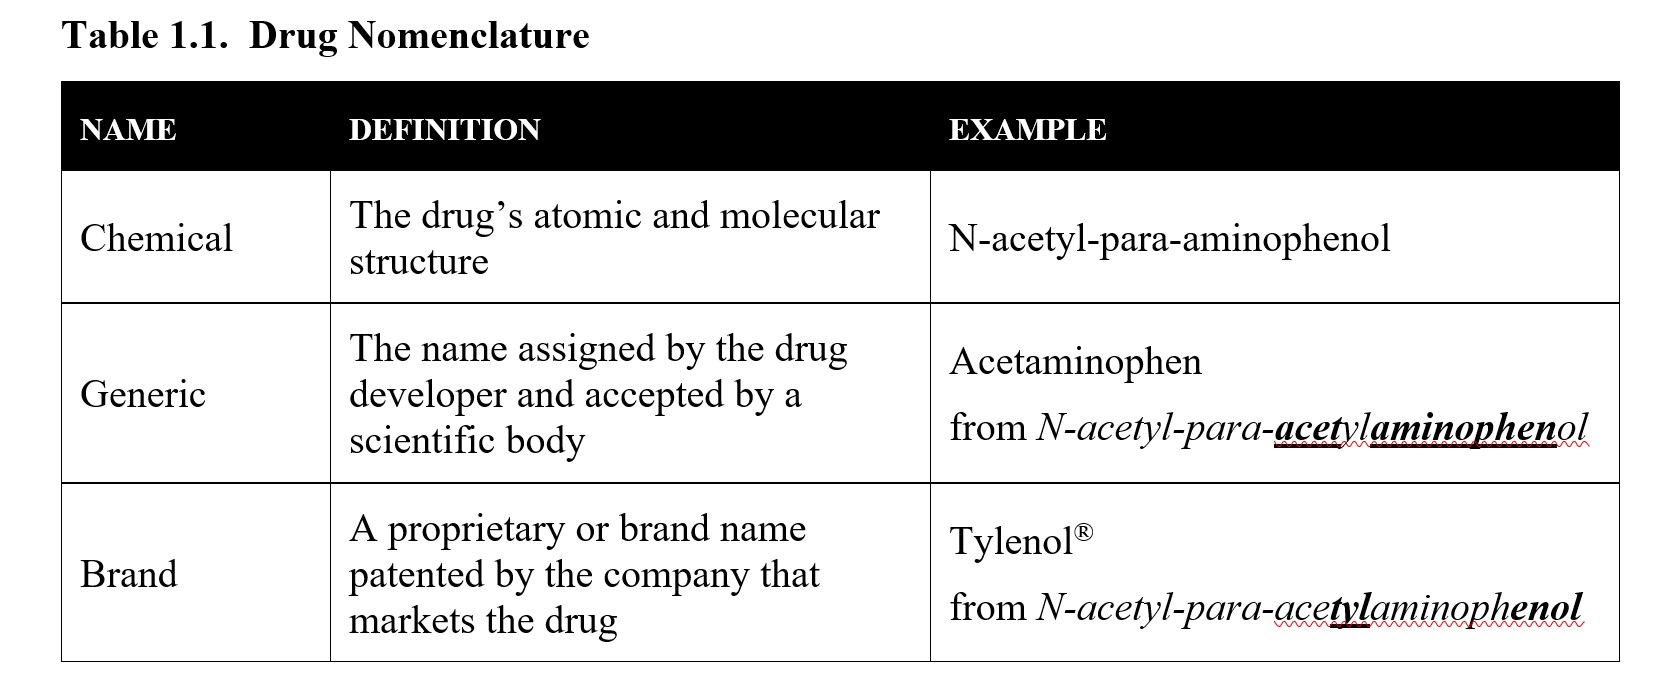 Generic Drugs - Definition, Names & Examples